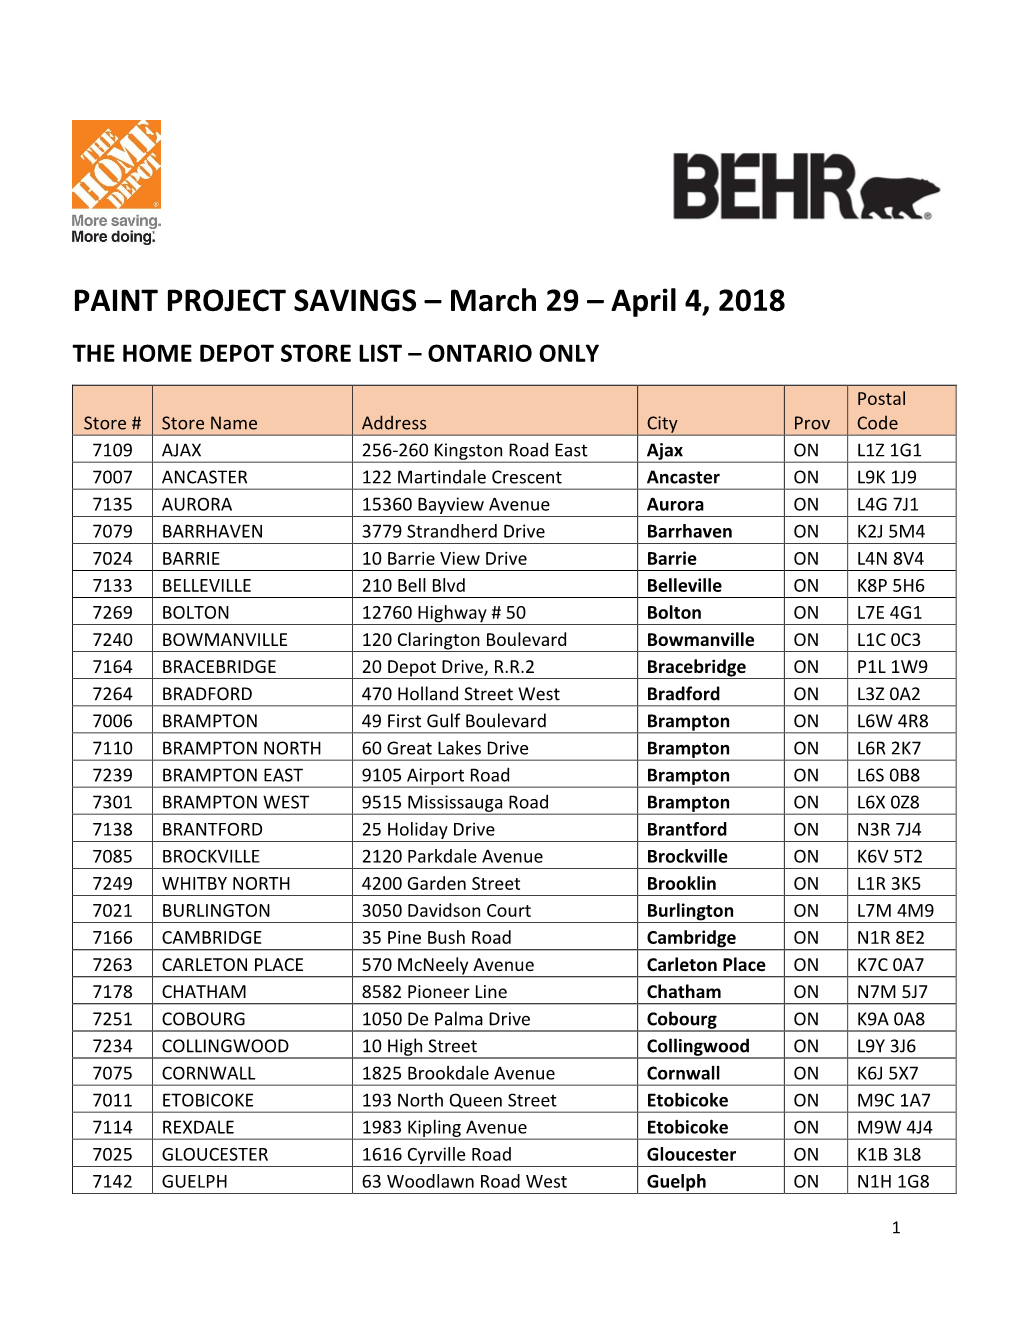 PAINT PROJECT SAVINGS – March 29 – April 4, 2018 the HOME DEPOT STORE LIST – ONTARIO ONLY